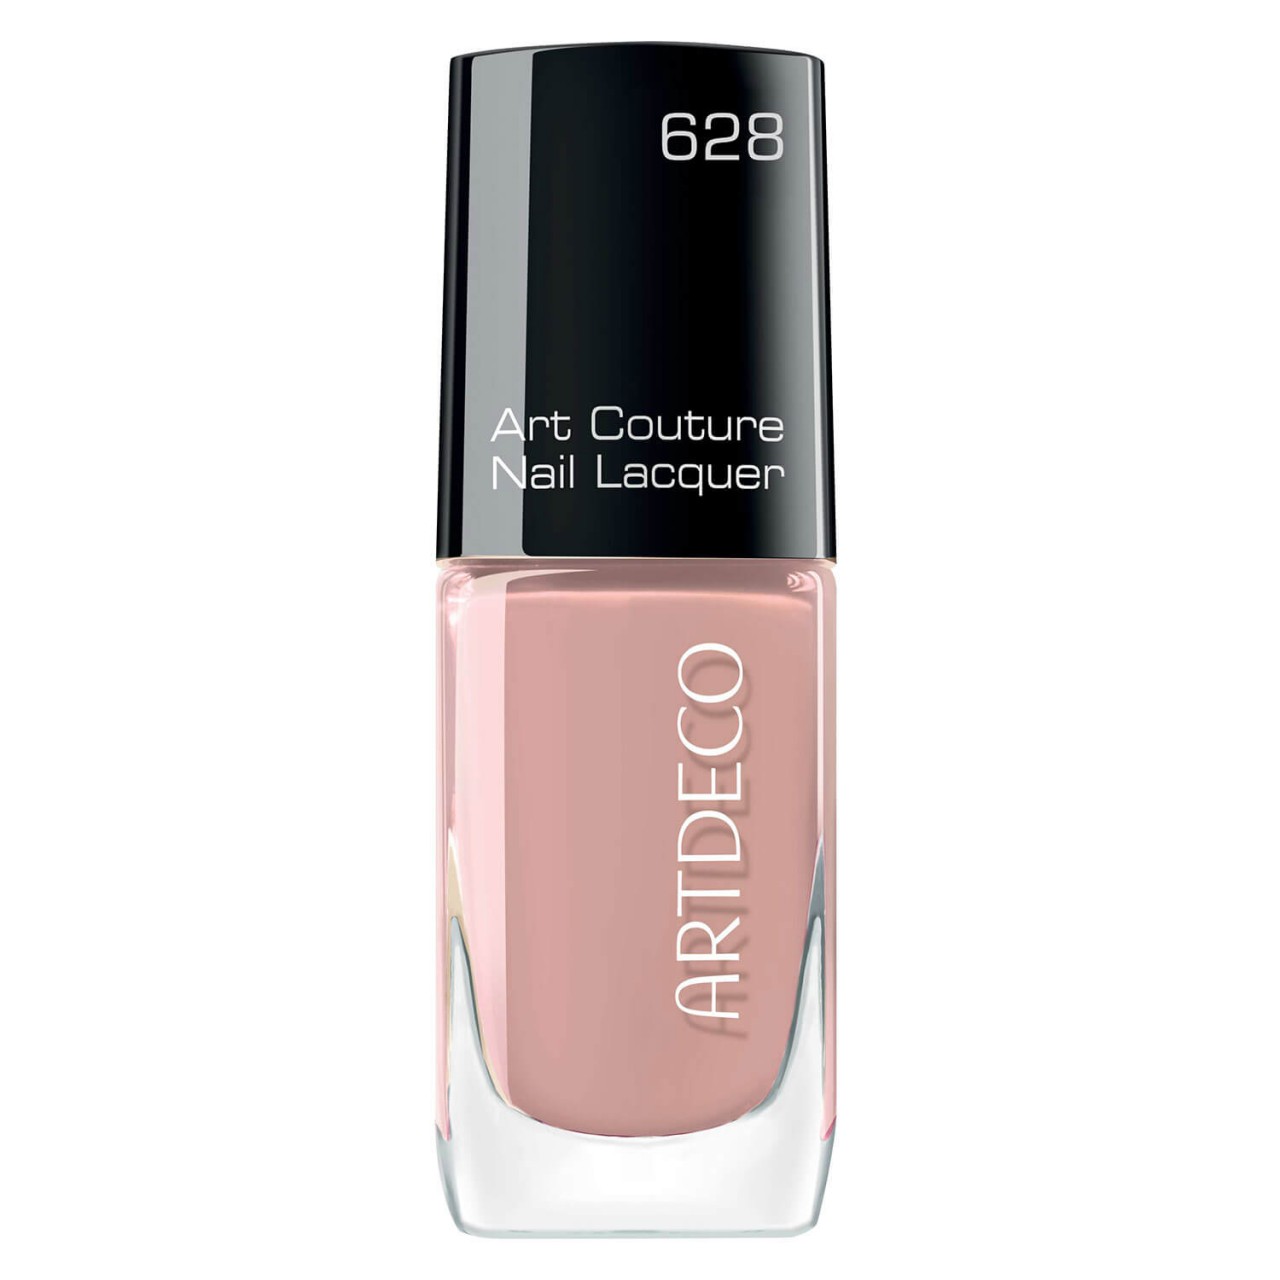 Art Couture - Nail Lacquer Touch of Rose 628 von Artdeco